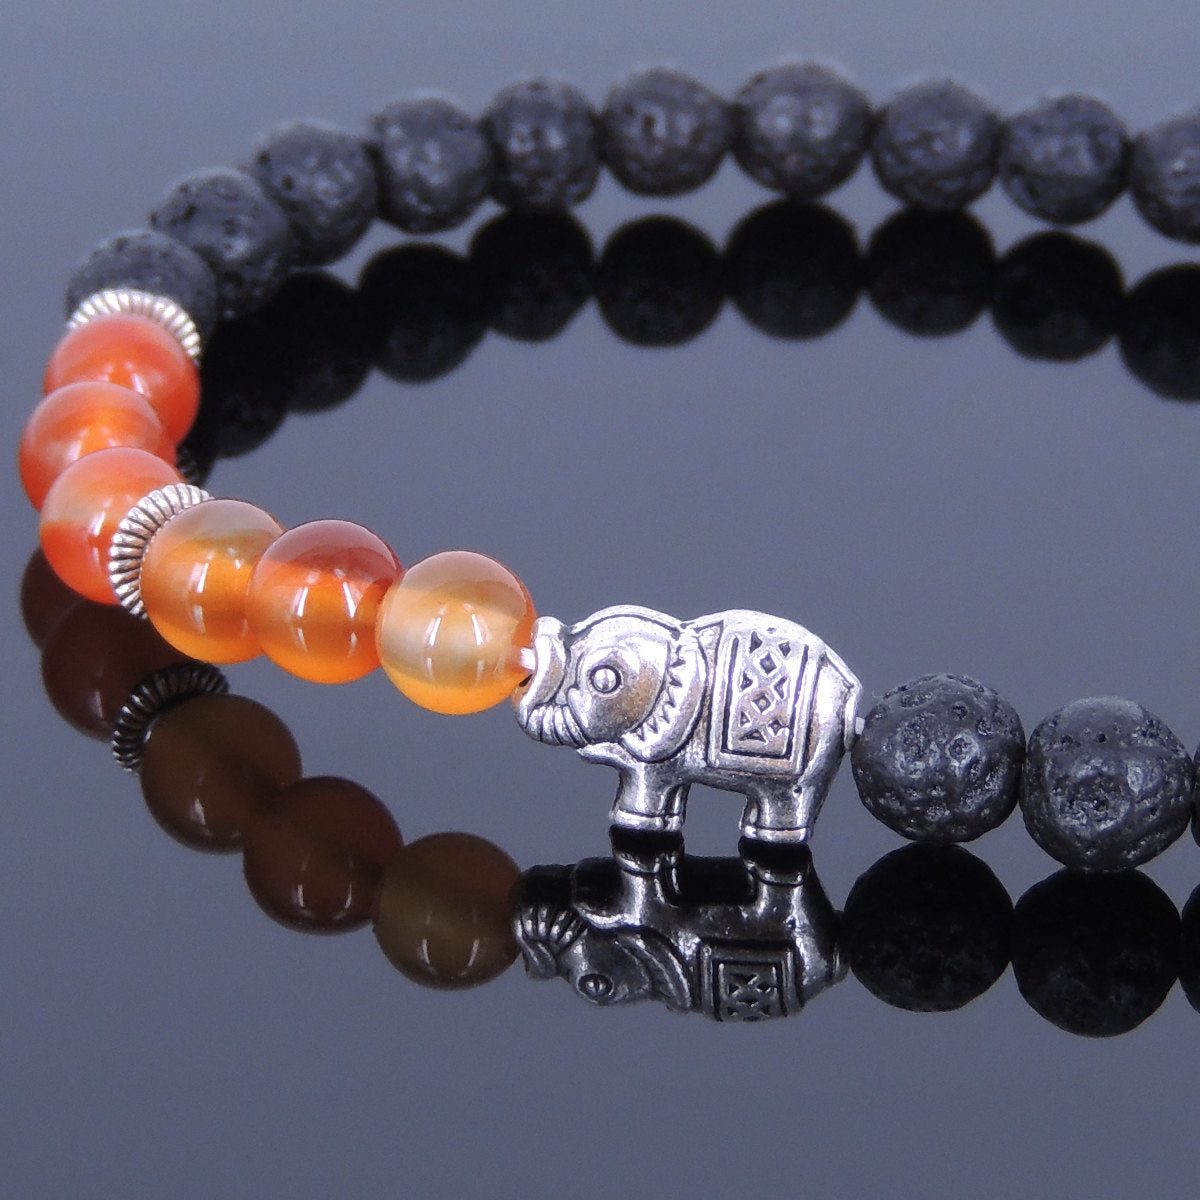 6mm Red Carnelian & Lava Rock Healing Stone Bracelet with Tibetan Silver Protection Elephant & Spacers - Handmade by Gem and Silver TSB049